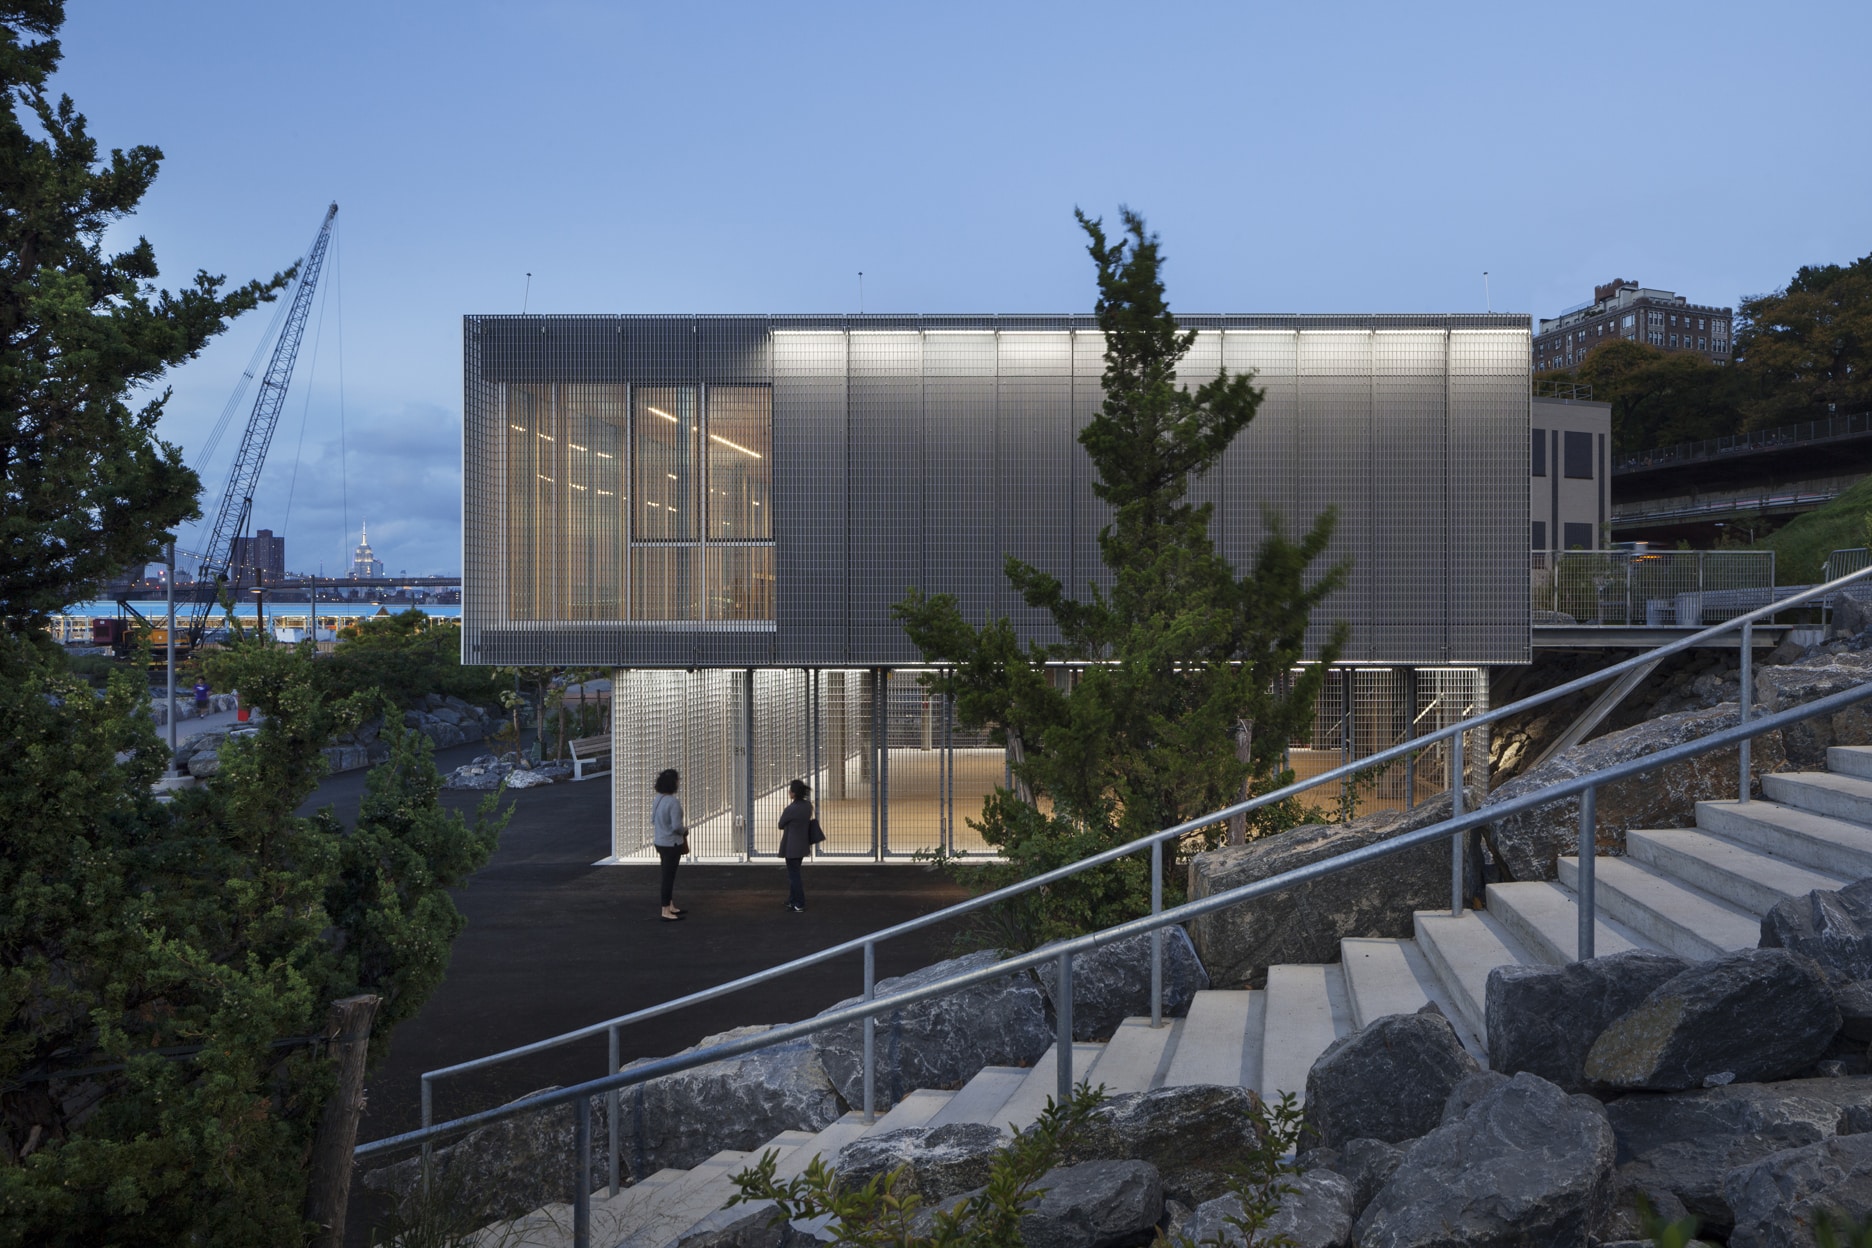 Boathouse in Brooklyn Bridge Park, Location: Brooklyn NY, Architect: Murphy Architecture Research Office